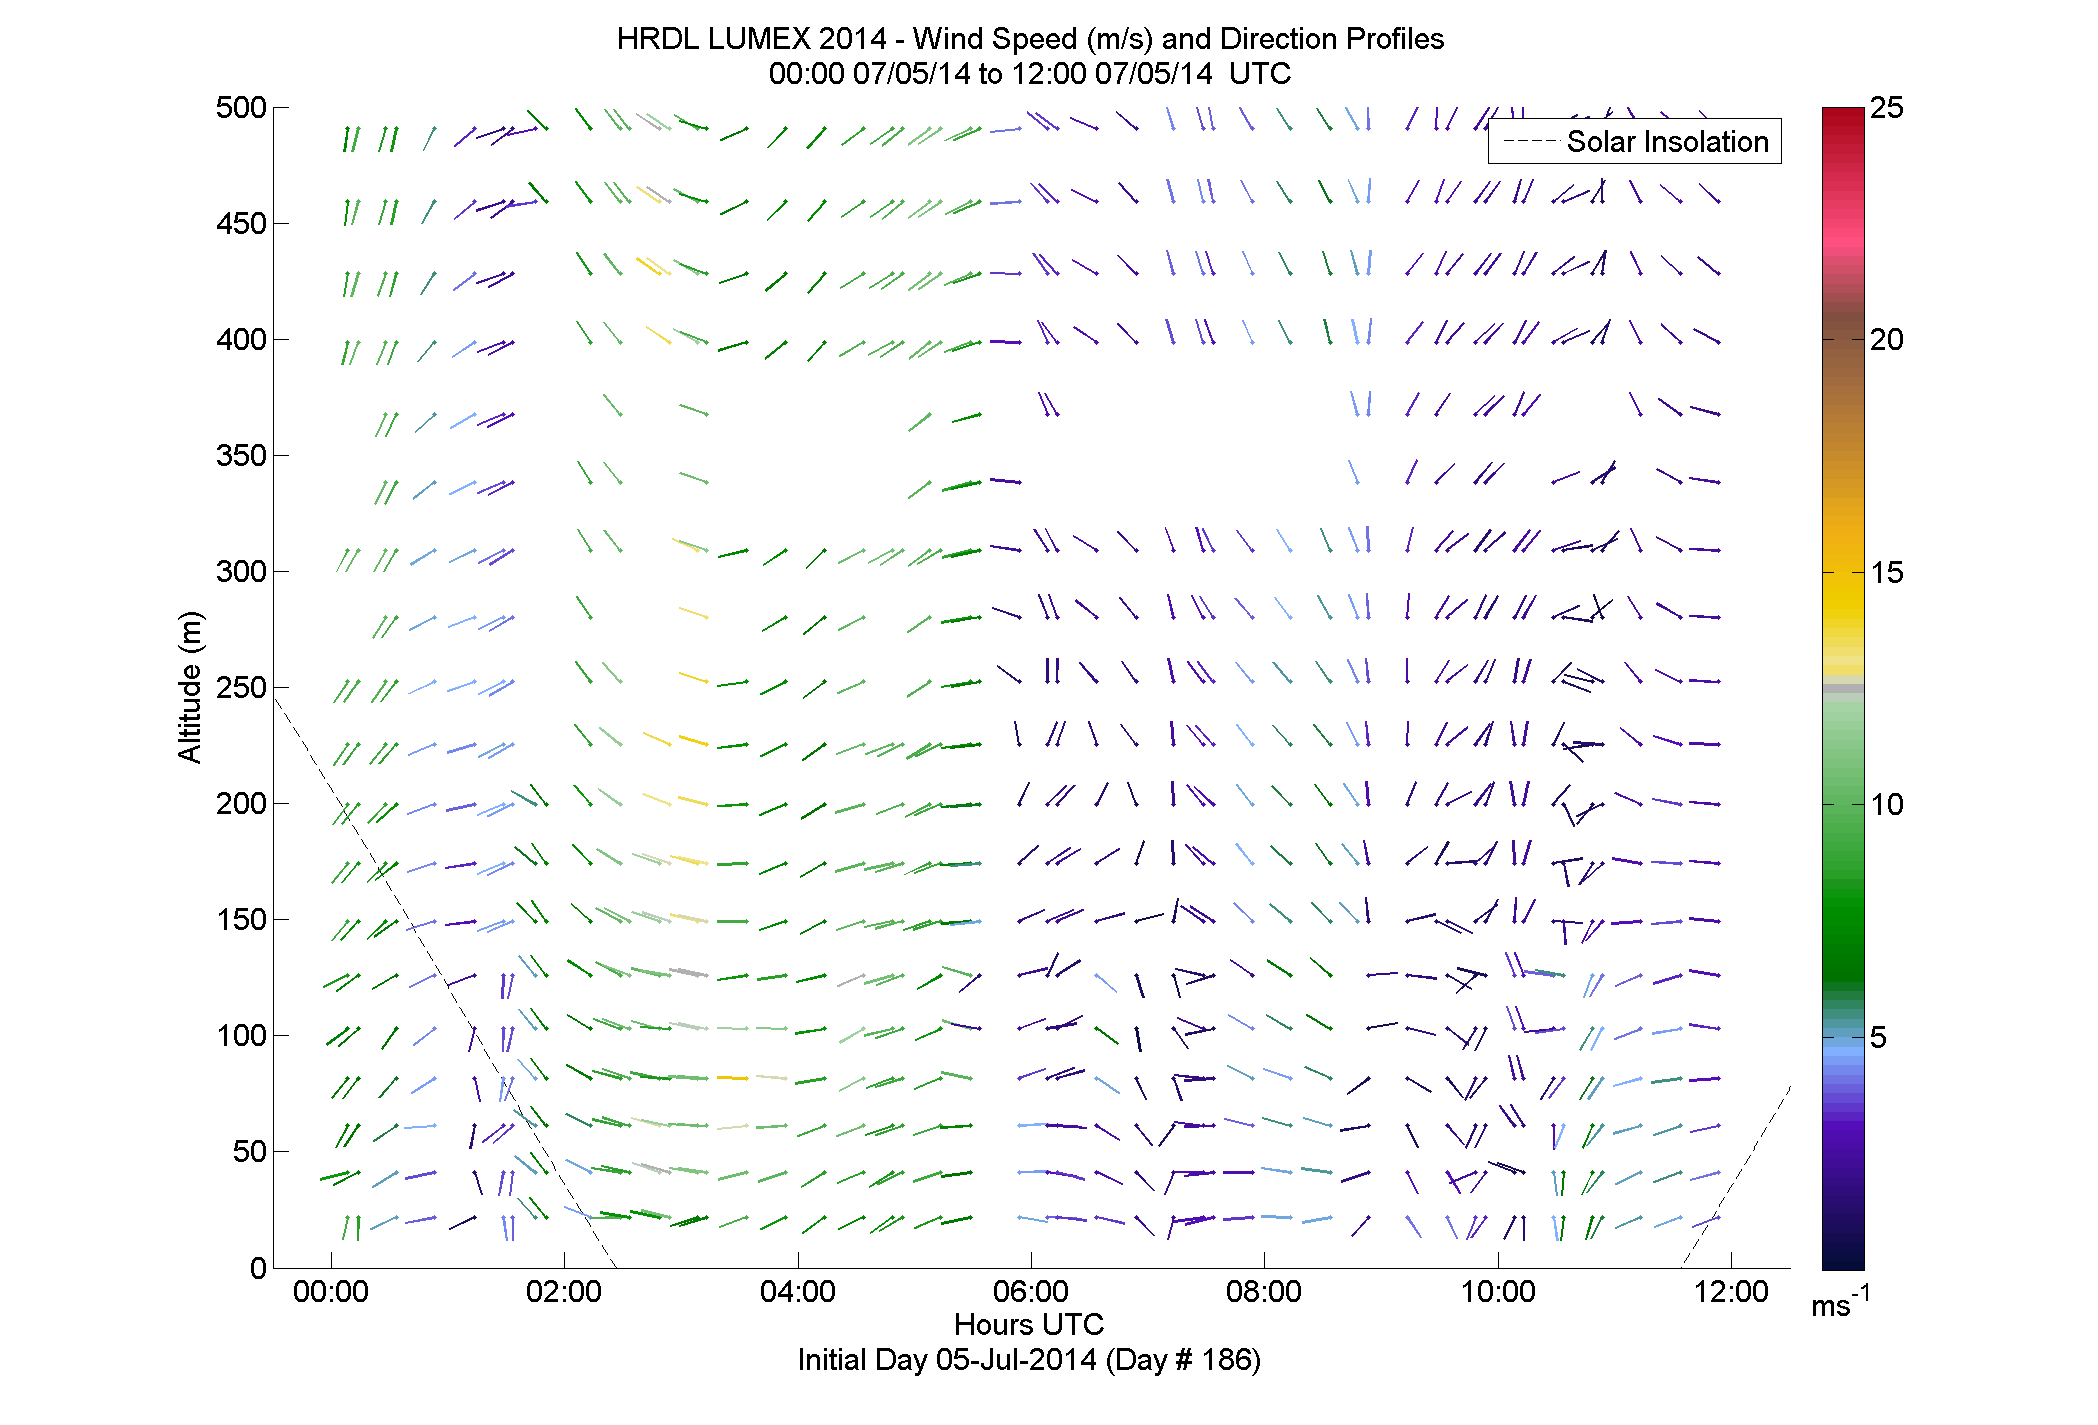 HRDL speed and direction profile - July 5 am